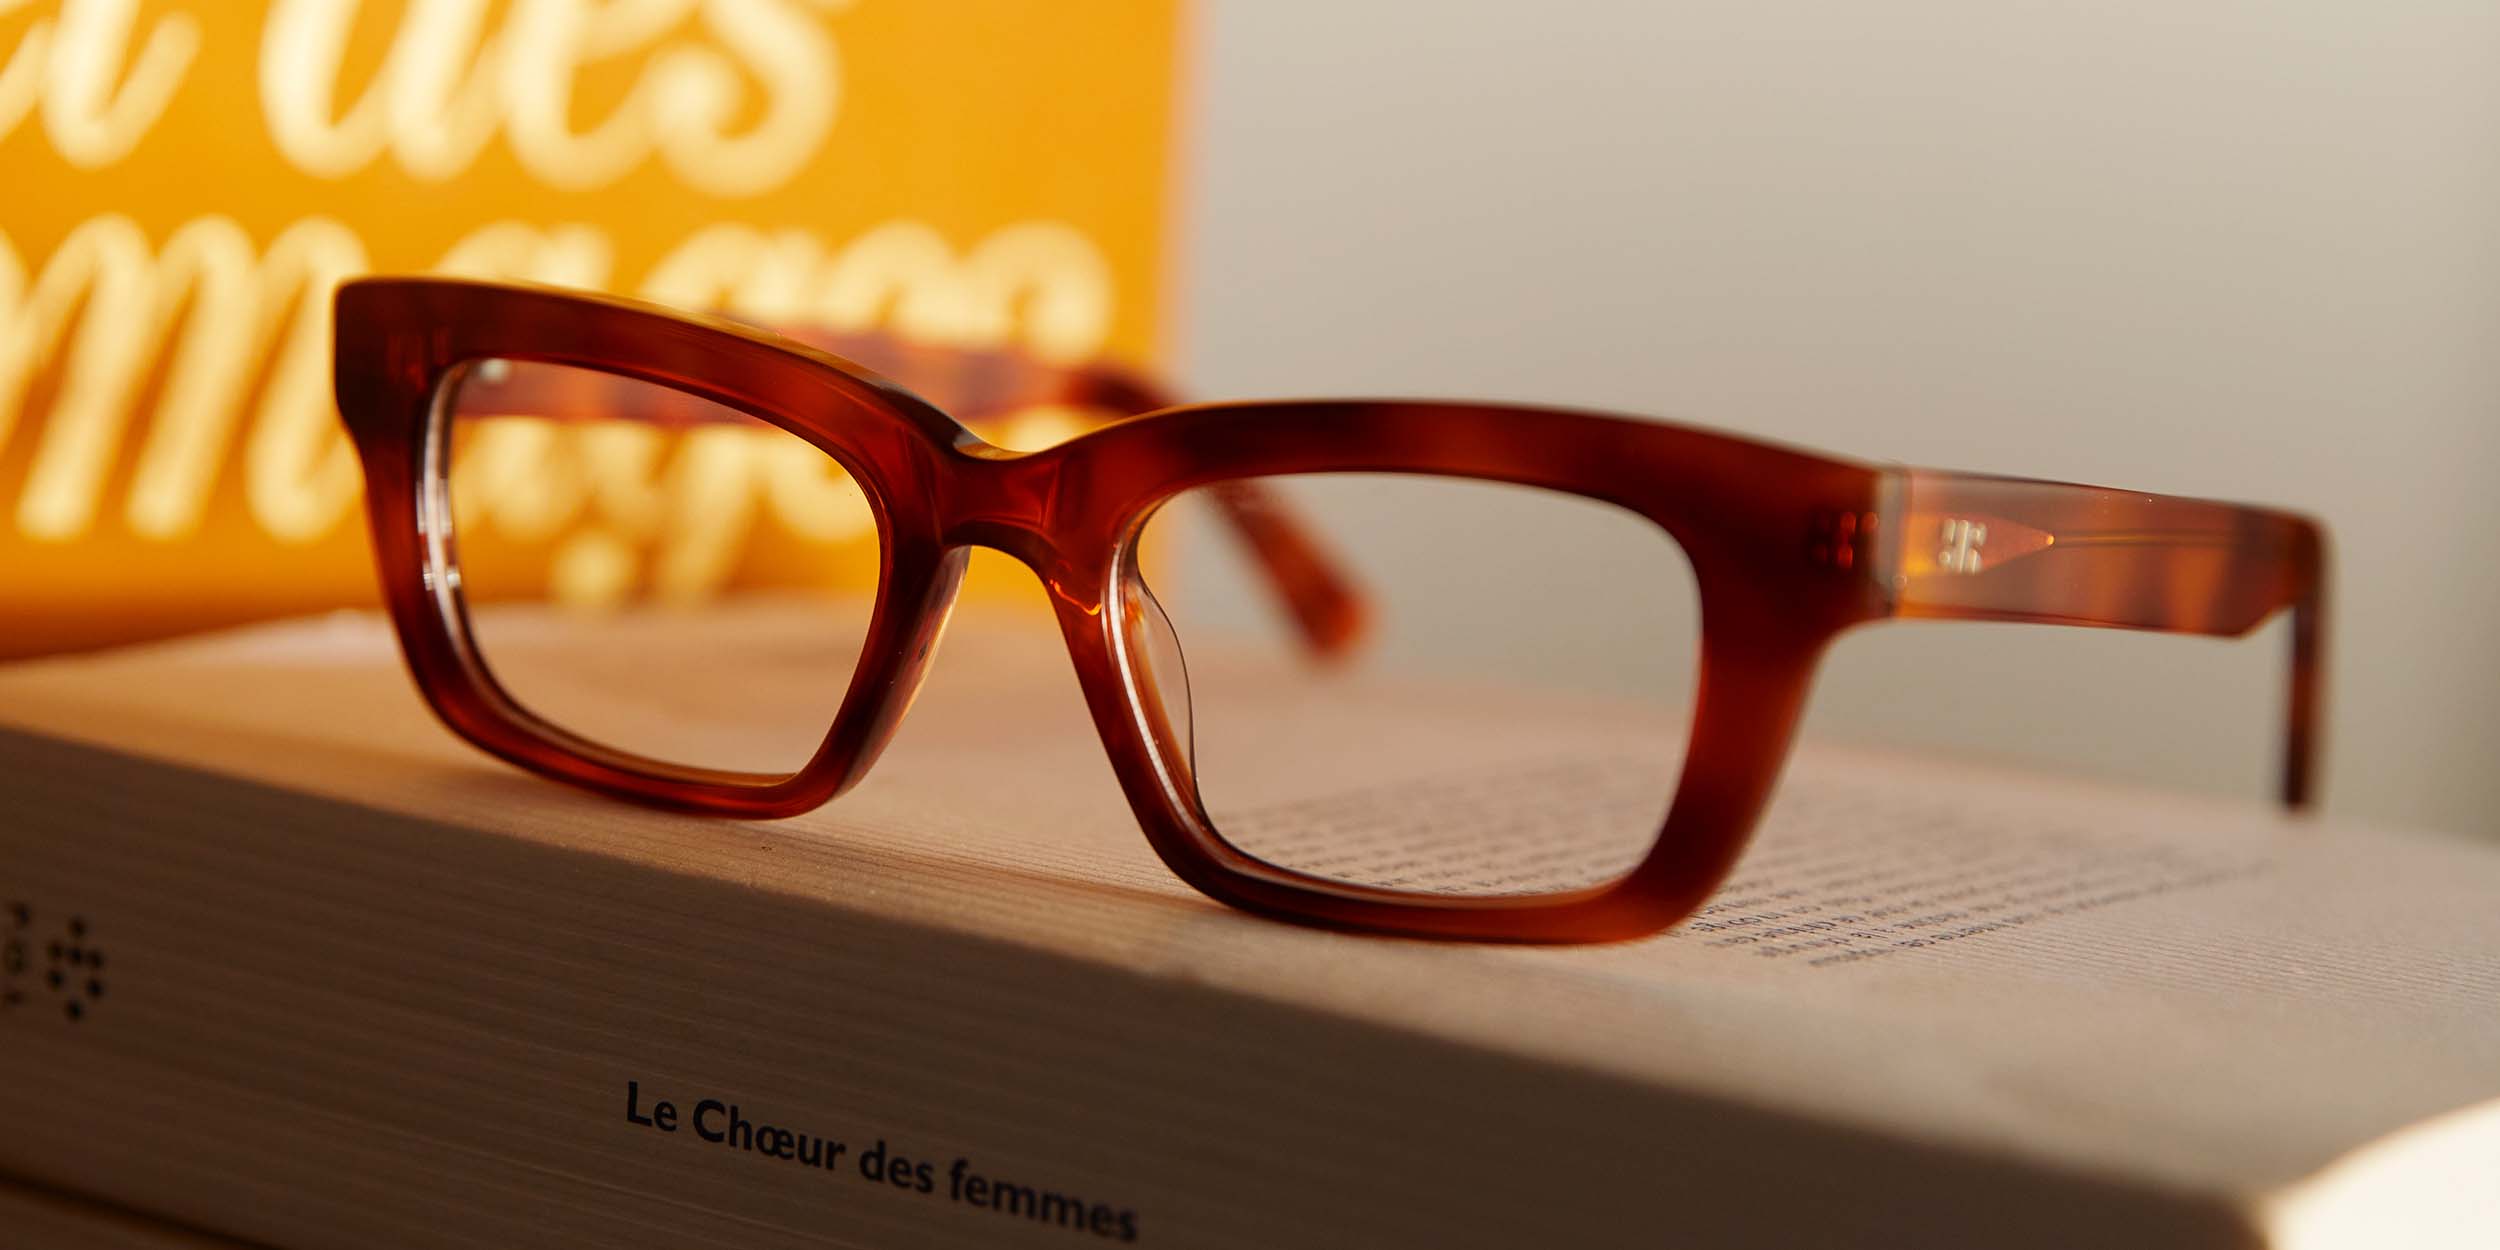 Photo Details of Margot Cognac Reading Glasses in a room